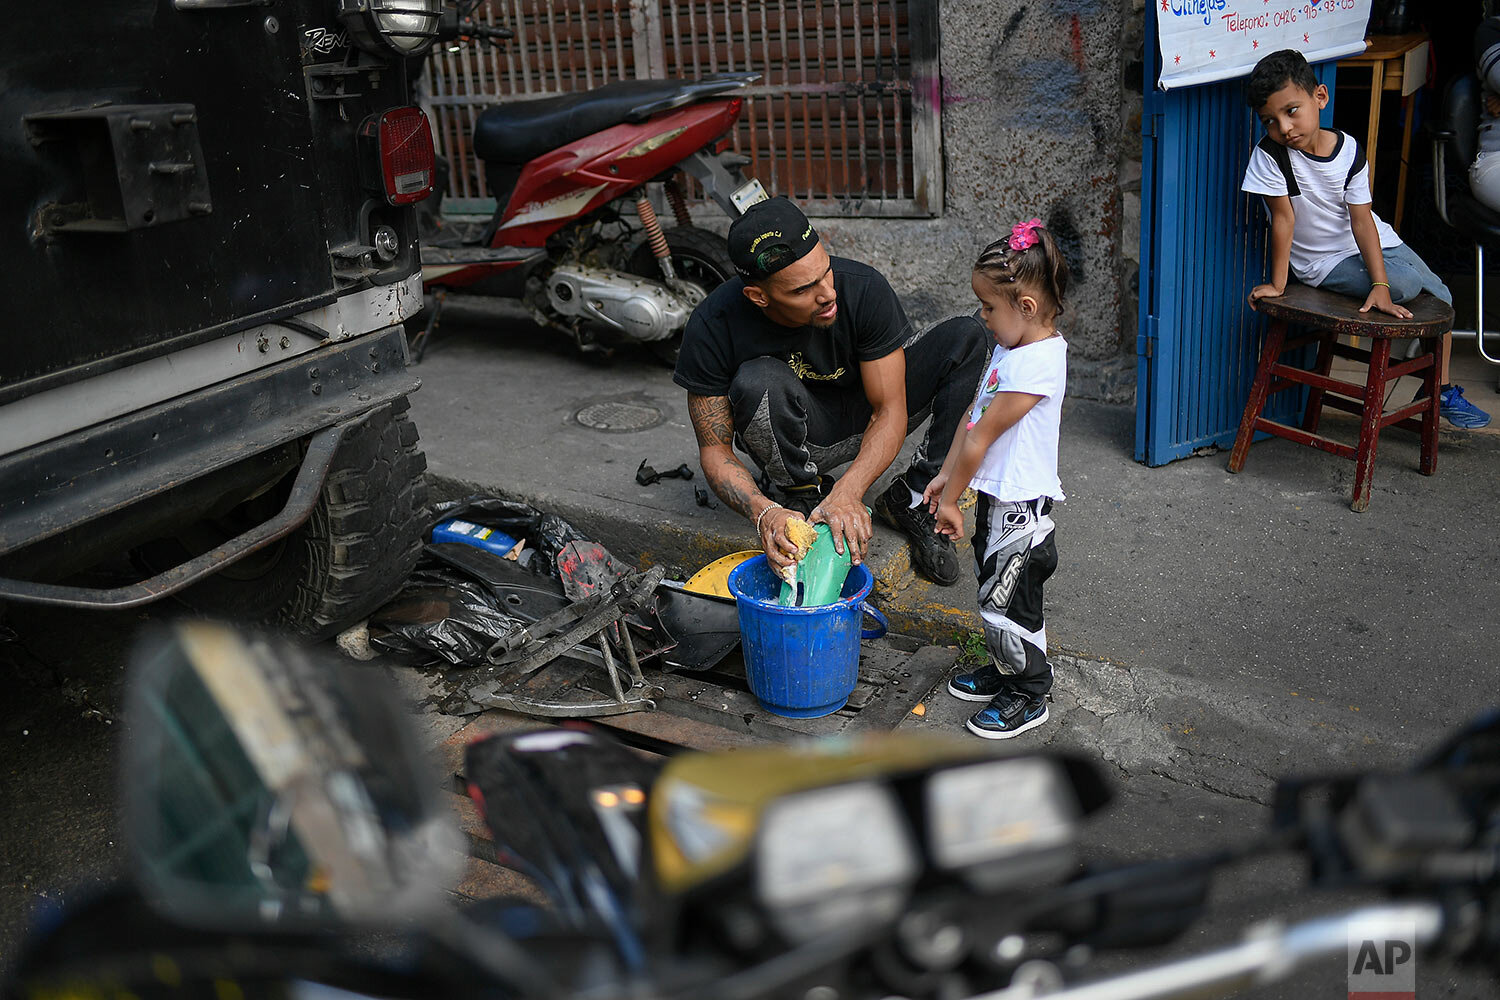  Motorcycle stuntman Pedro Aldana cleans motorcycle parts with his daughter Alanis as his young neighbor and admirer, 6-year-old Milan Sandoval Ramos, watches from a chair outside their home in the Catia neighborhood of Caracas, Venezuela, Thursday, 